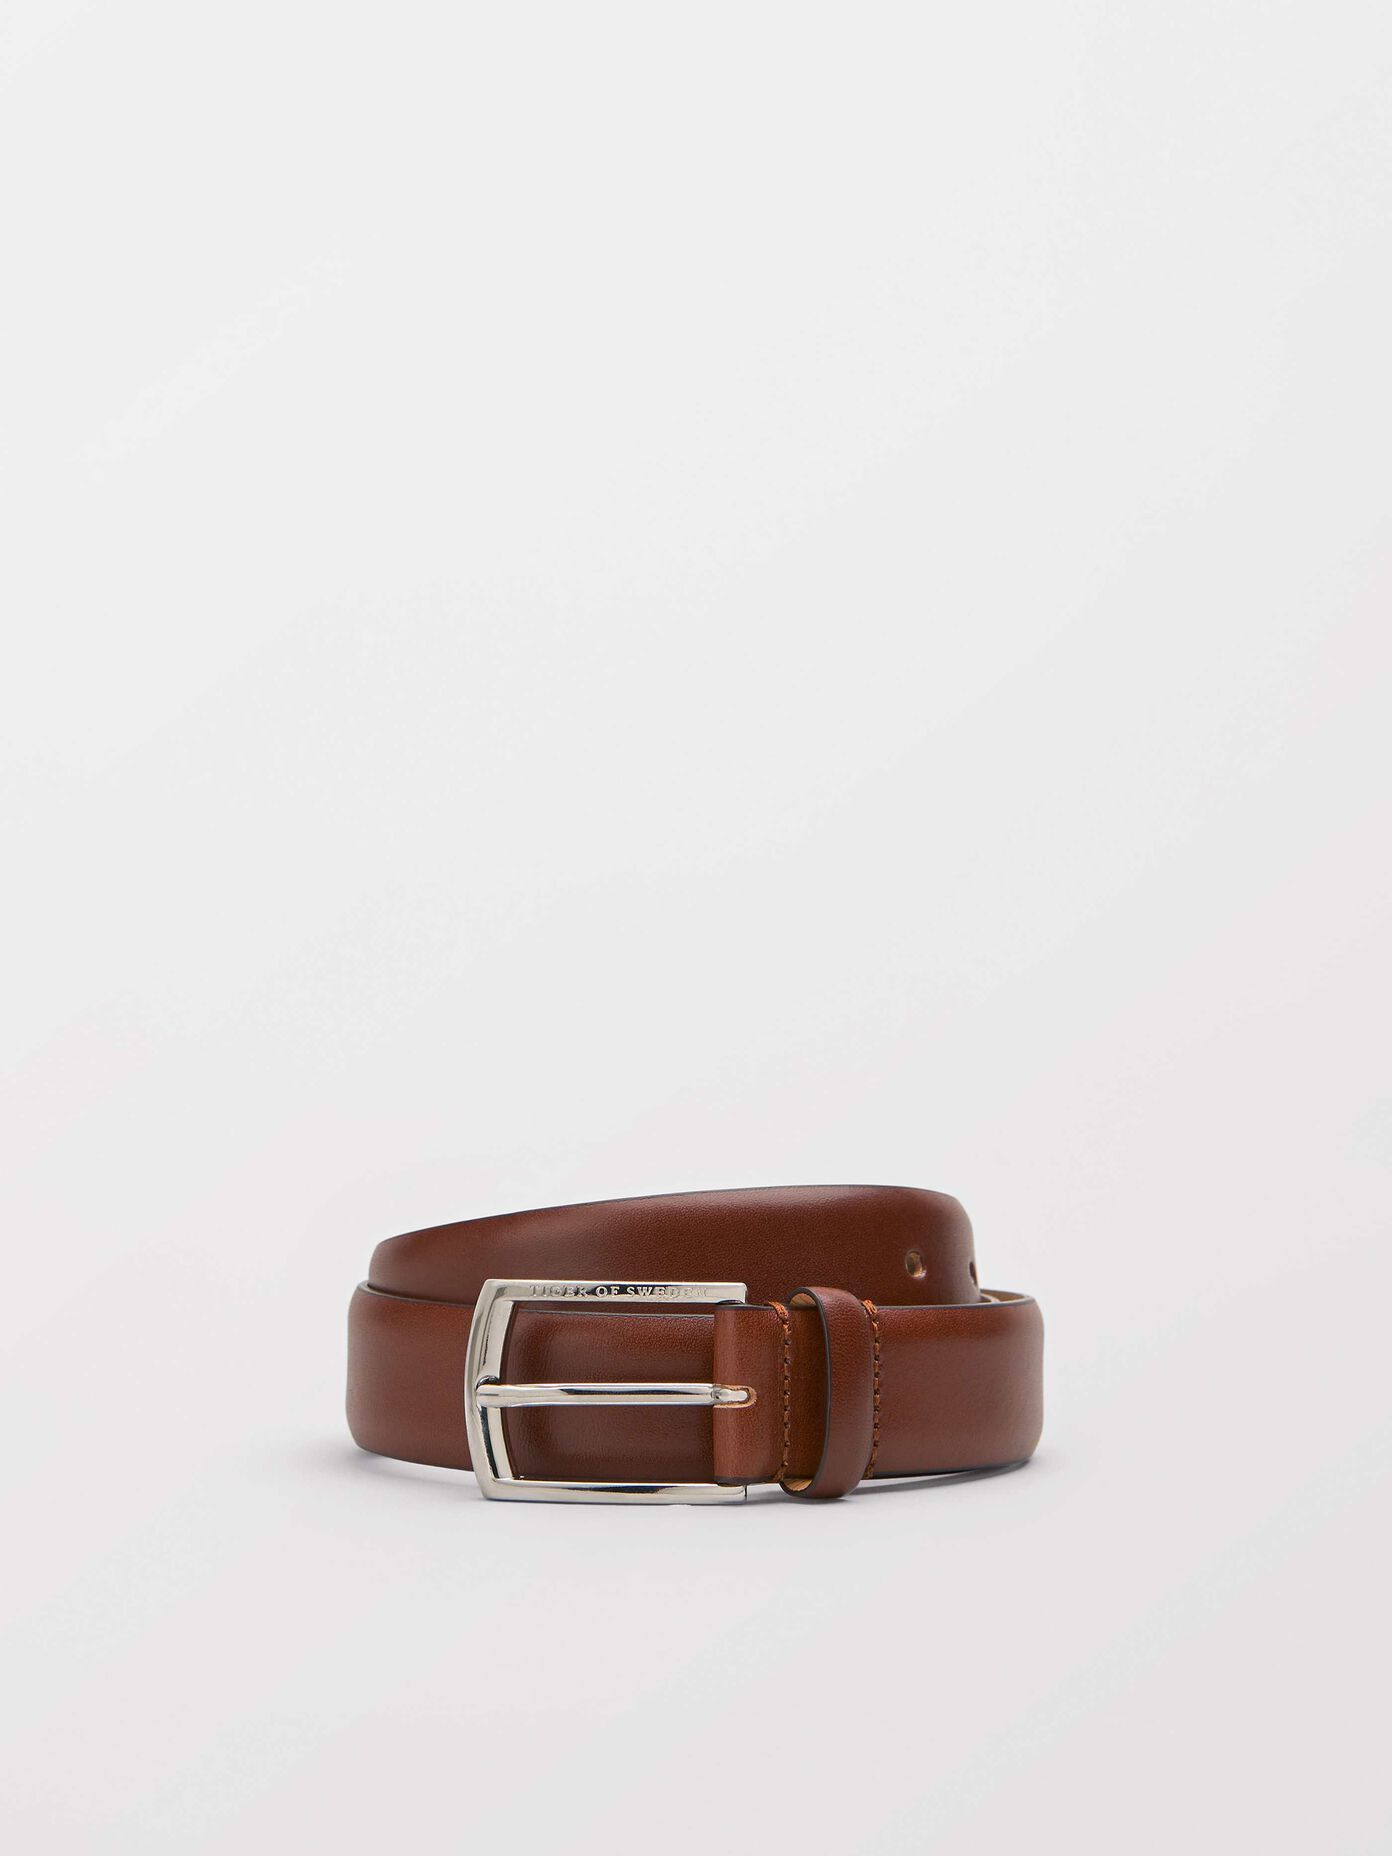 Accessories - Discover men's accessories online at Tiger of Sweden